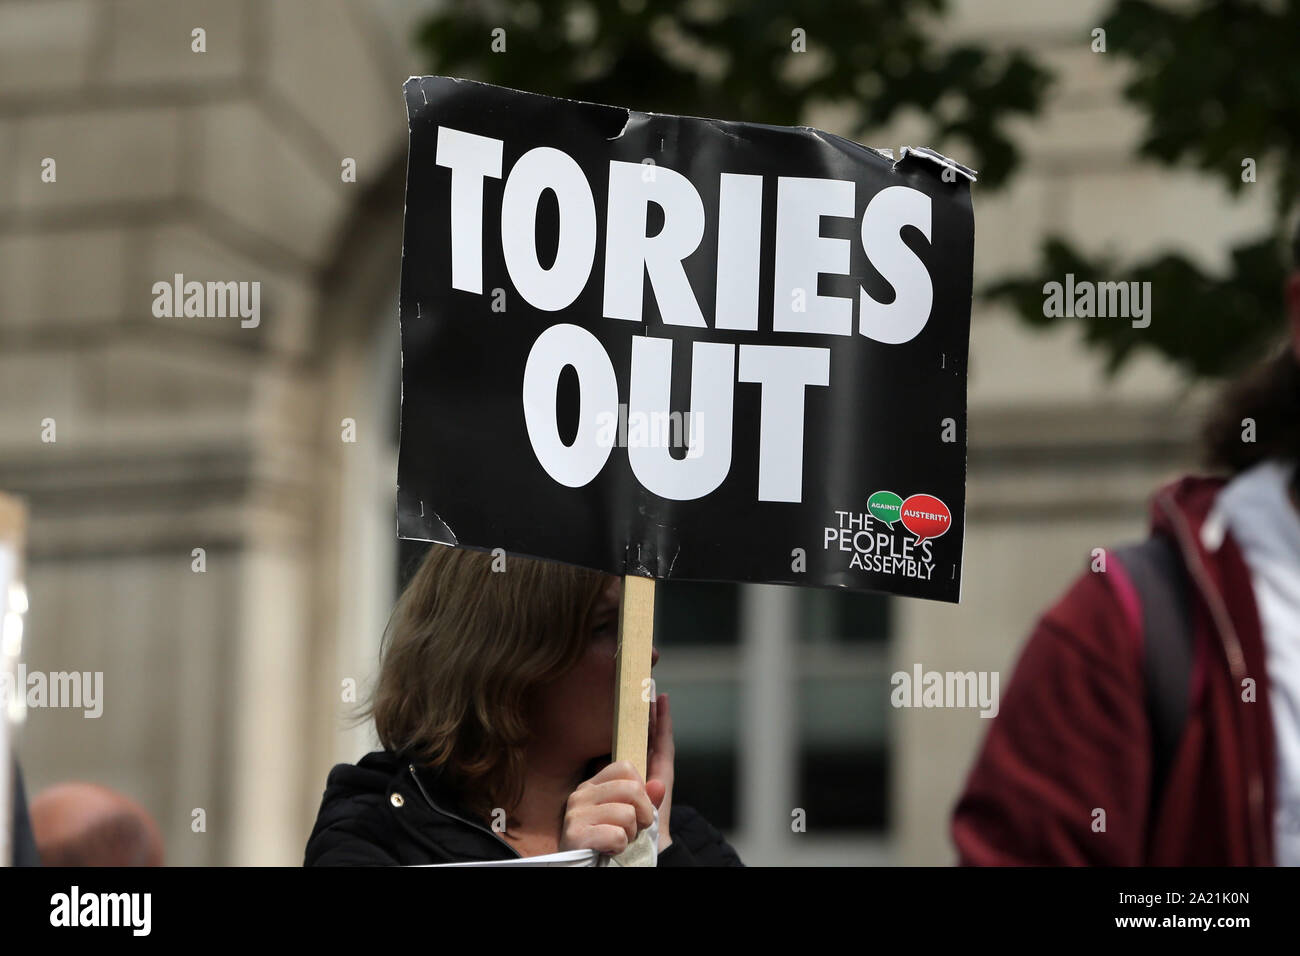 TORIES OUT SIGN, 2019 Stock Photo